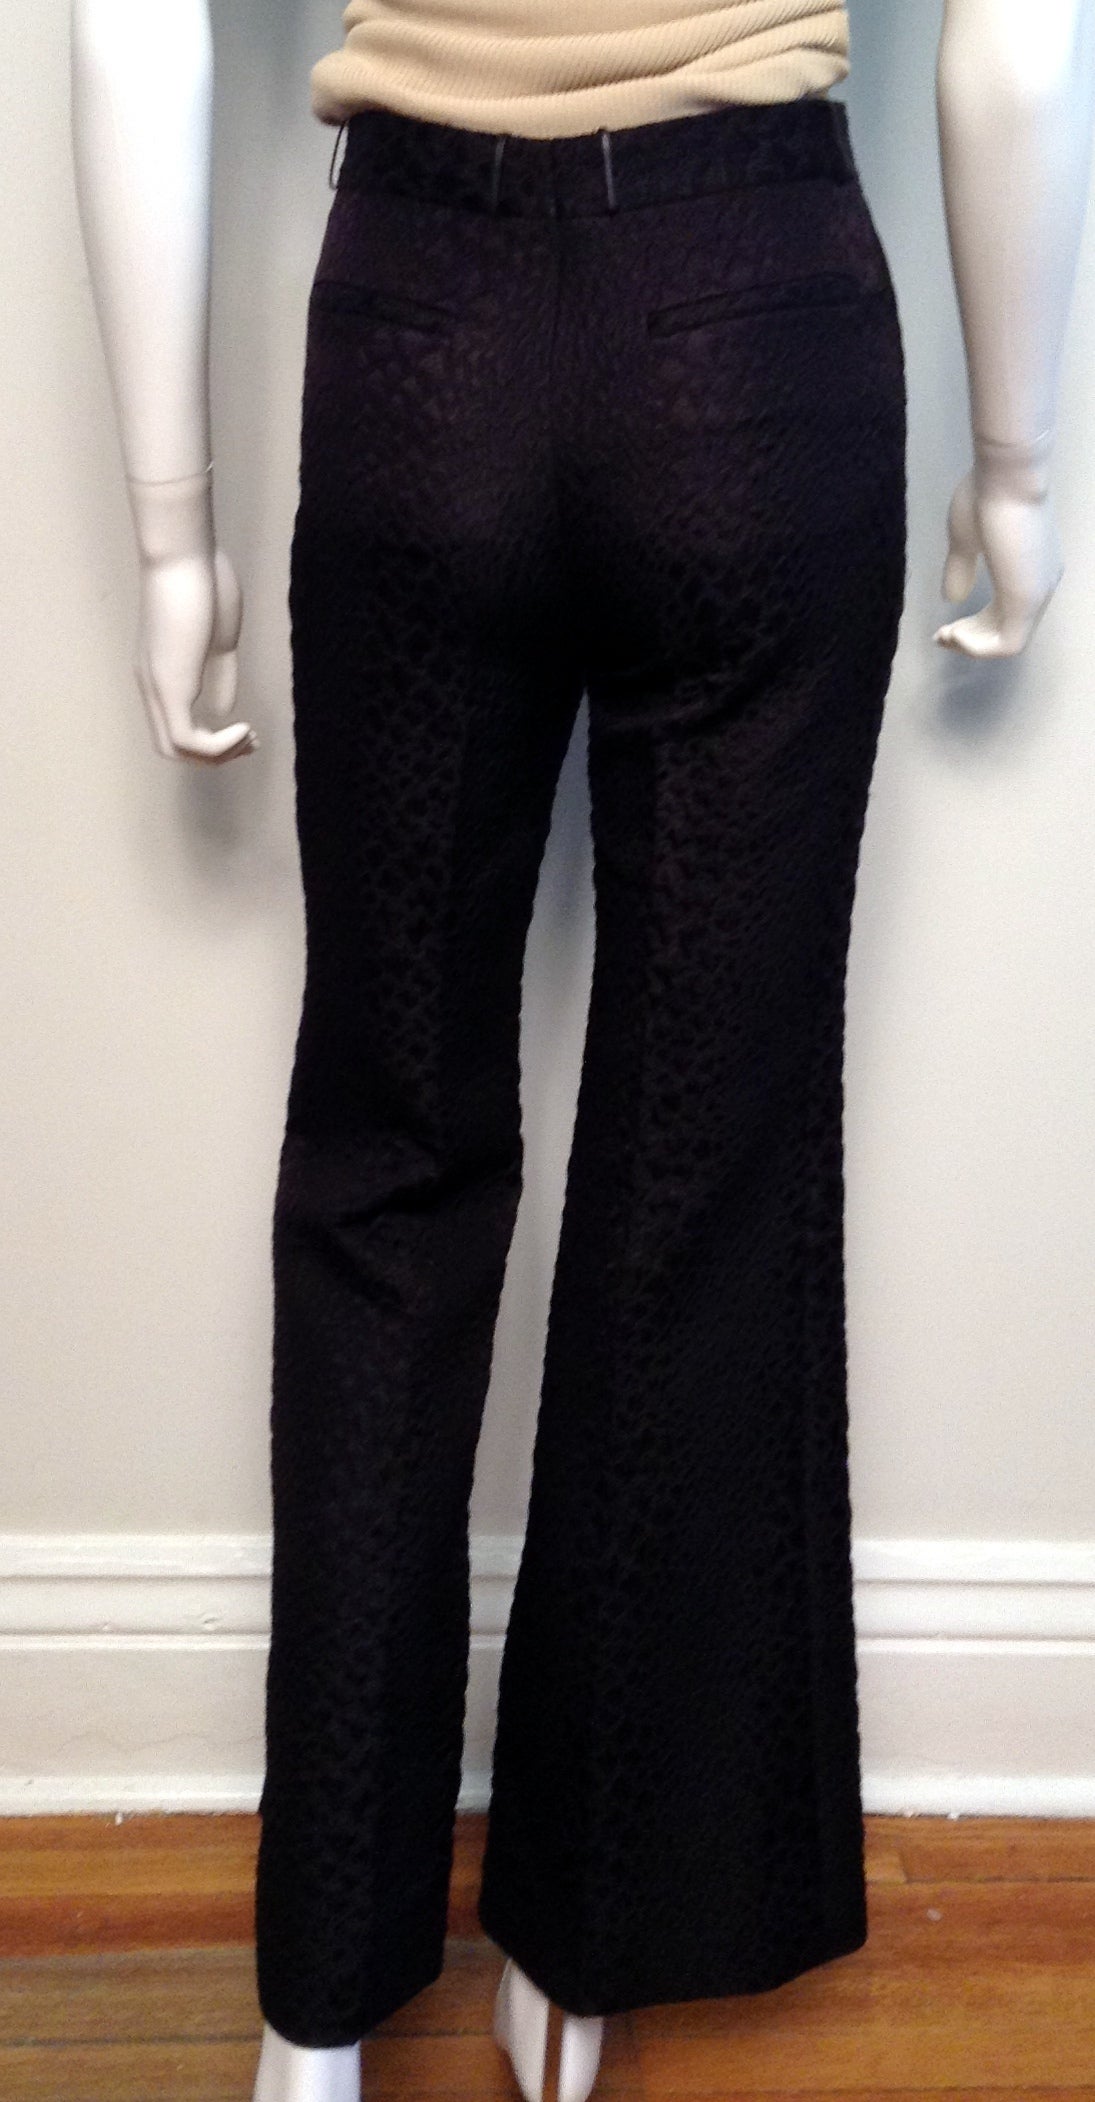 Tom Ford For Gucci Black Crocodile Textured Pant Suit with Pin SS00 For Sale 2